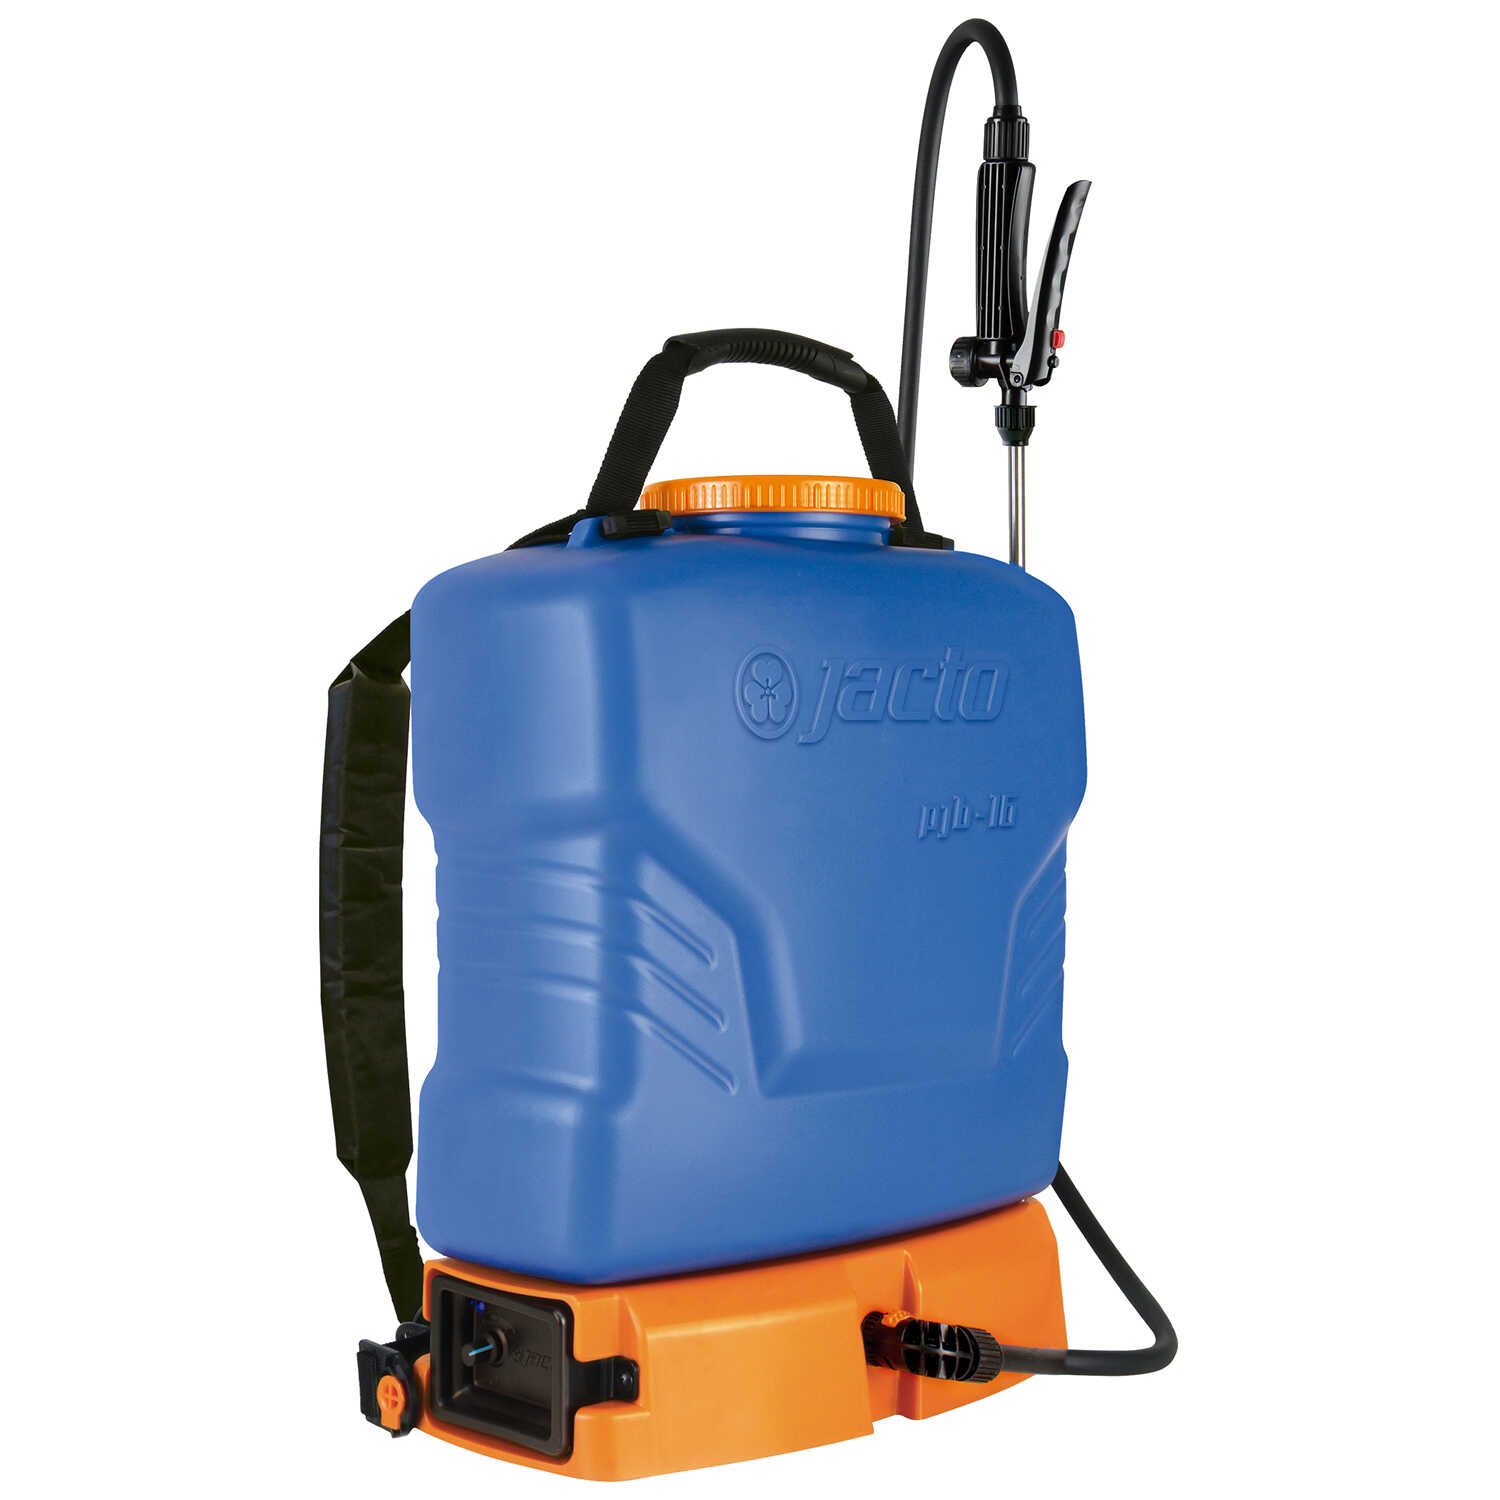 Battery Operated Sprayer PJB-16 60 PSI Jacto 4 Gallon Deluxe Light-weight 